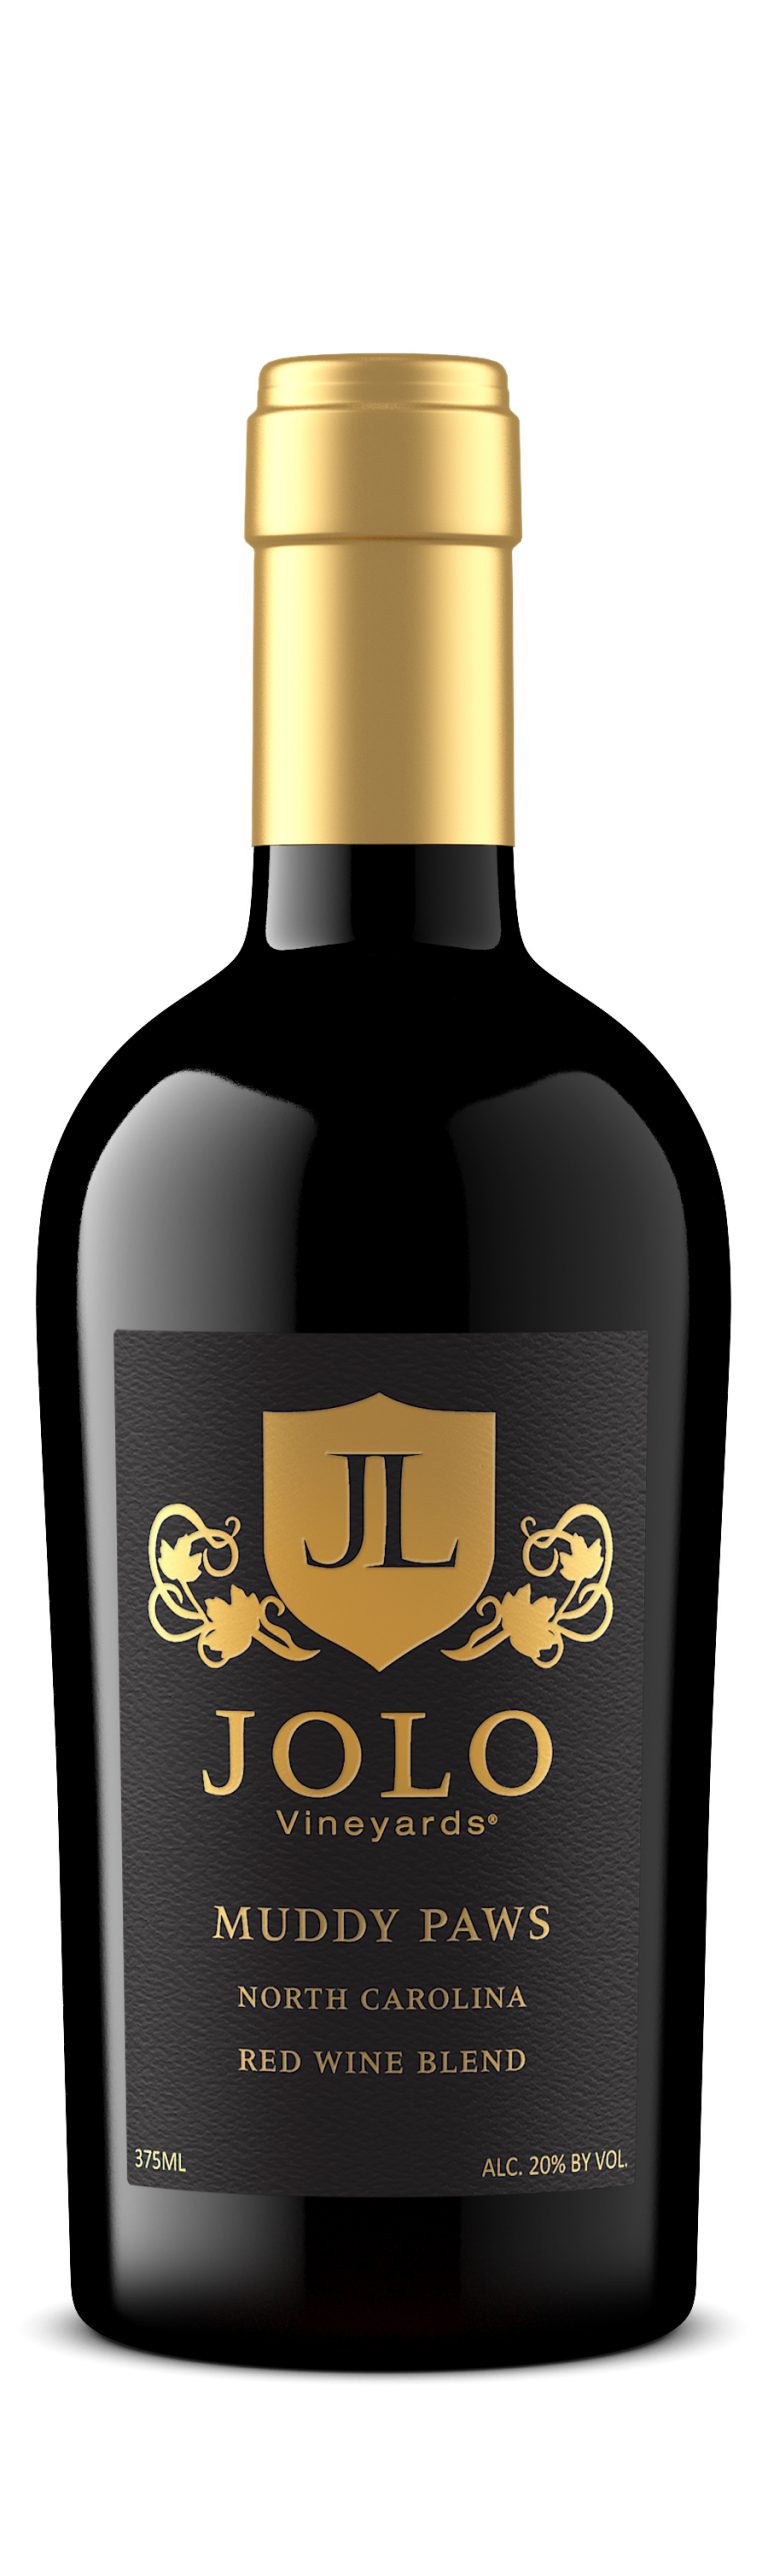 OUTSHINERY-JOLO_Winery-375mL-MuddyPaws-NV